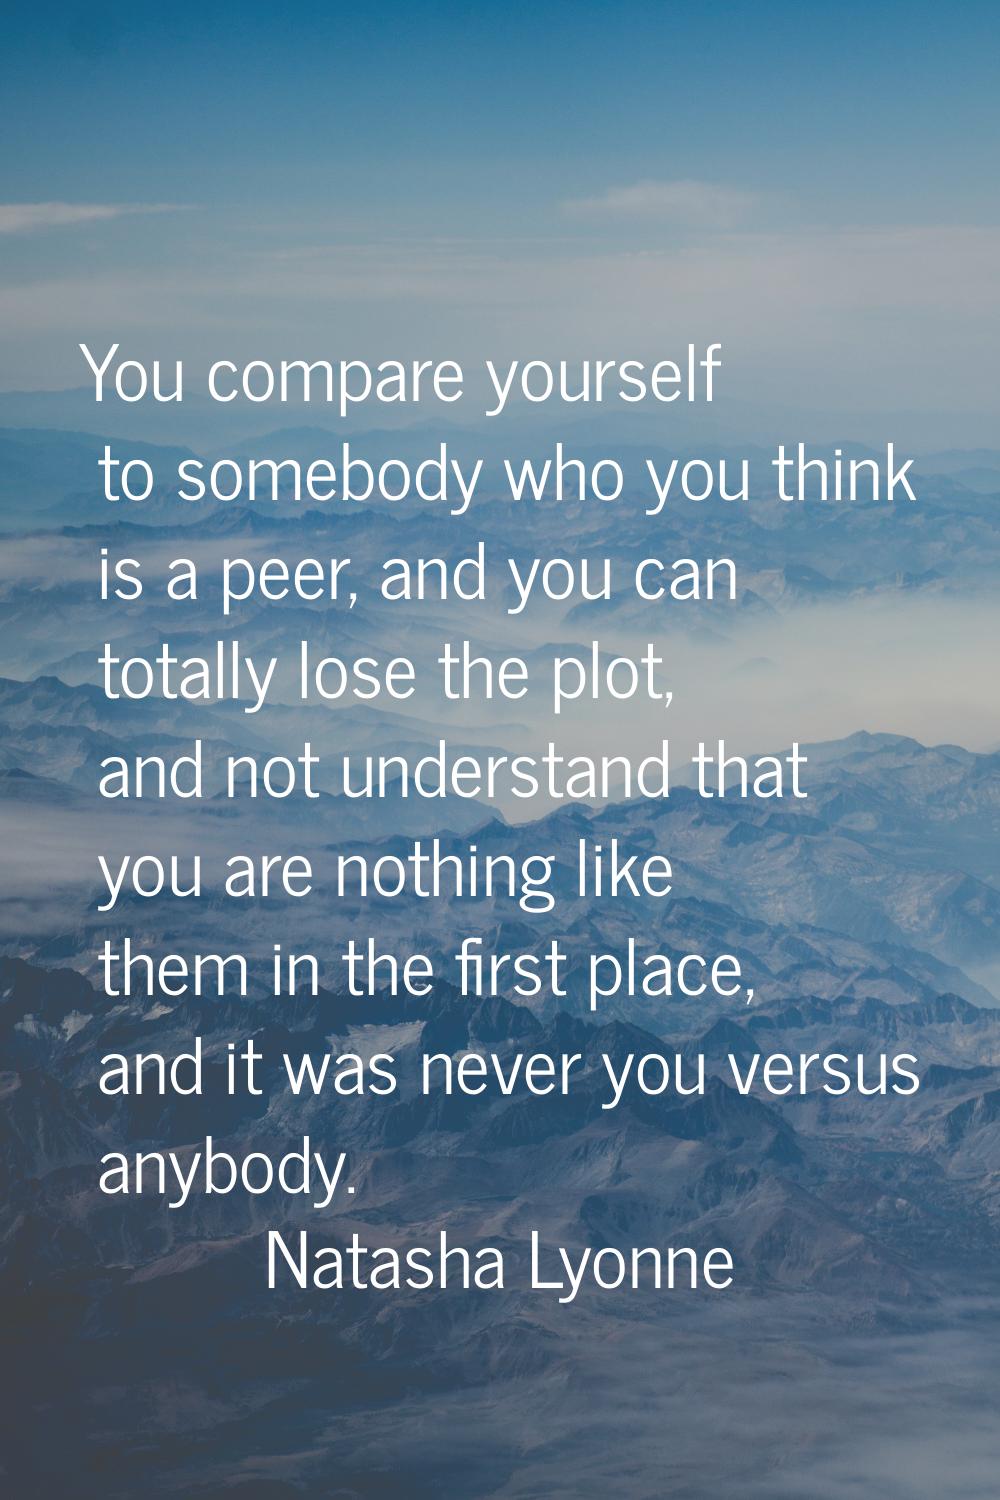 You compare yourself to somebody who you think is a peer, and you can totally lose the plot, and no